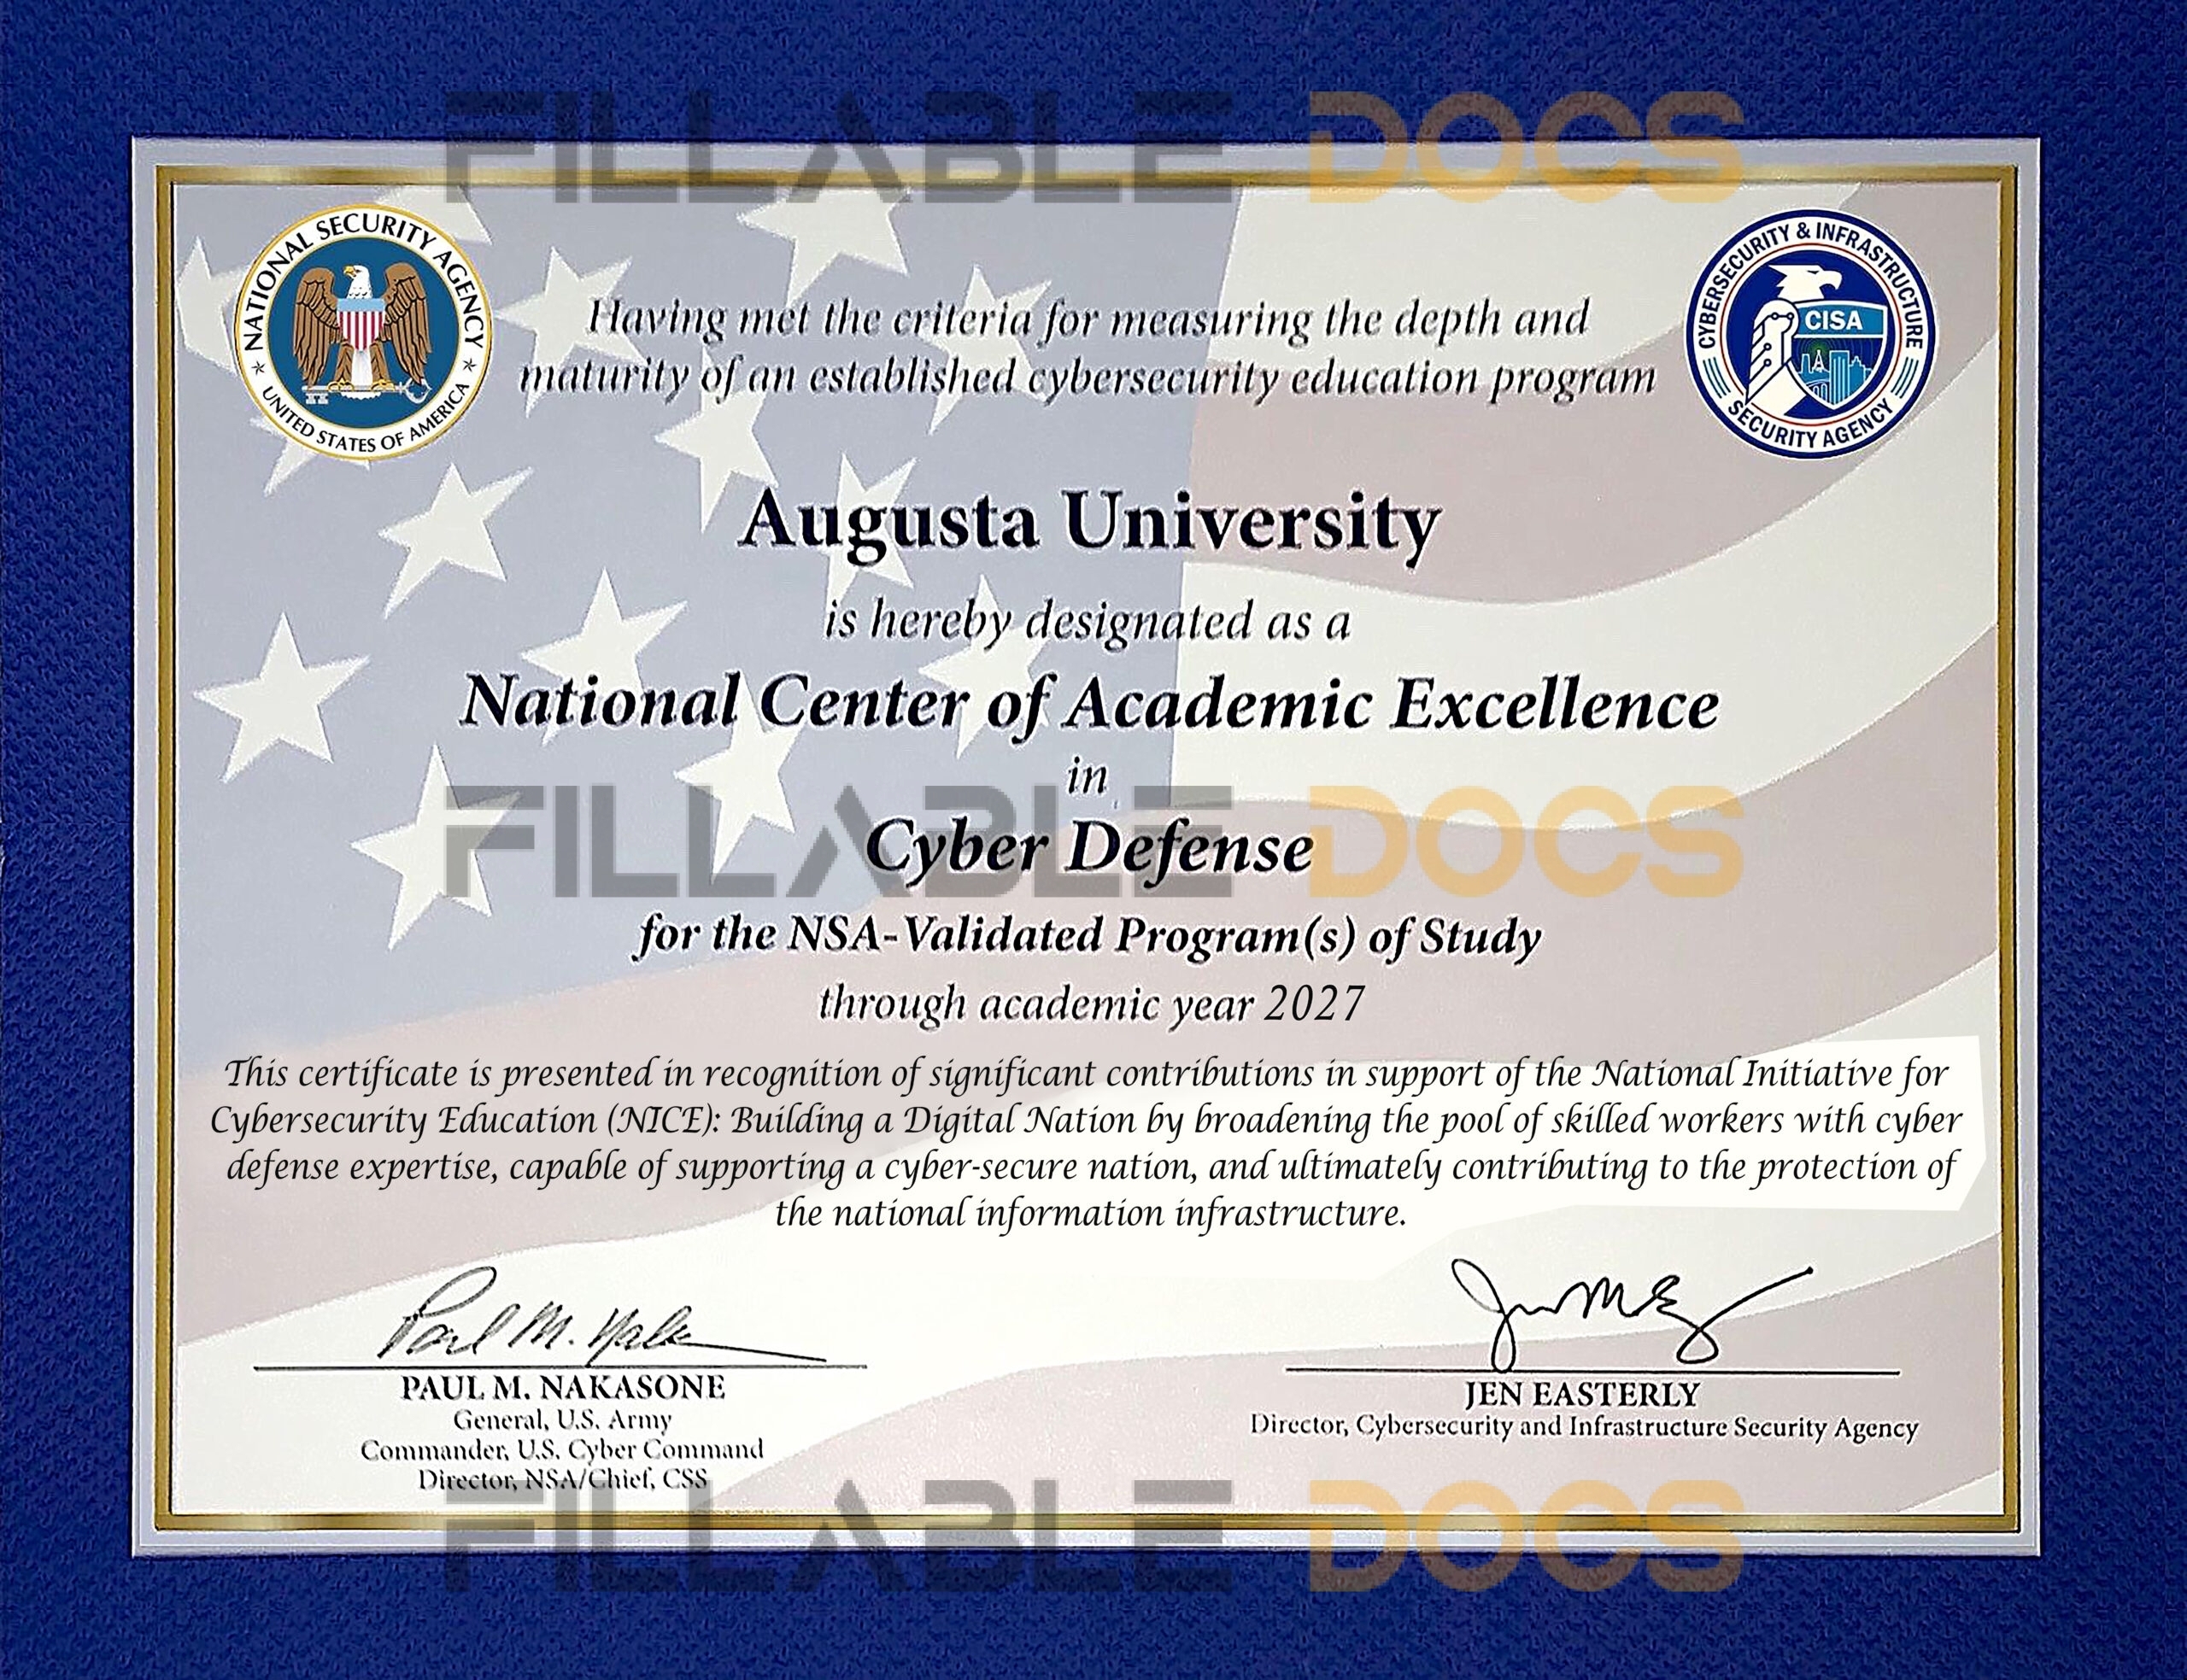 Authentic-Looking Fake certificate from Augusta University